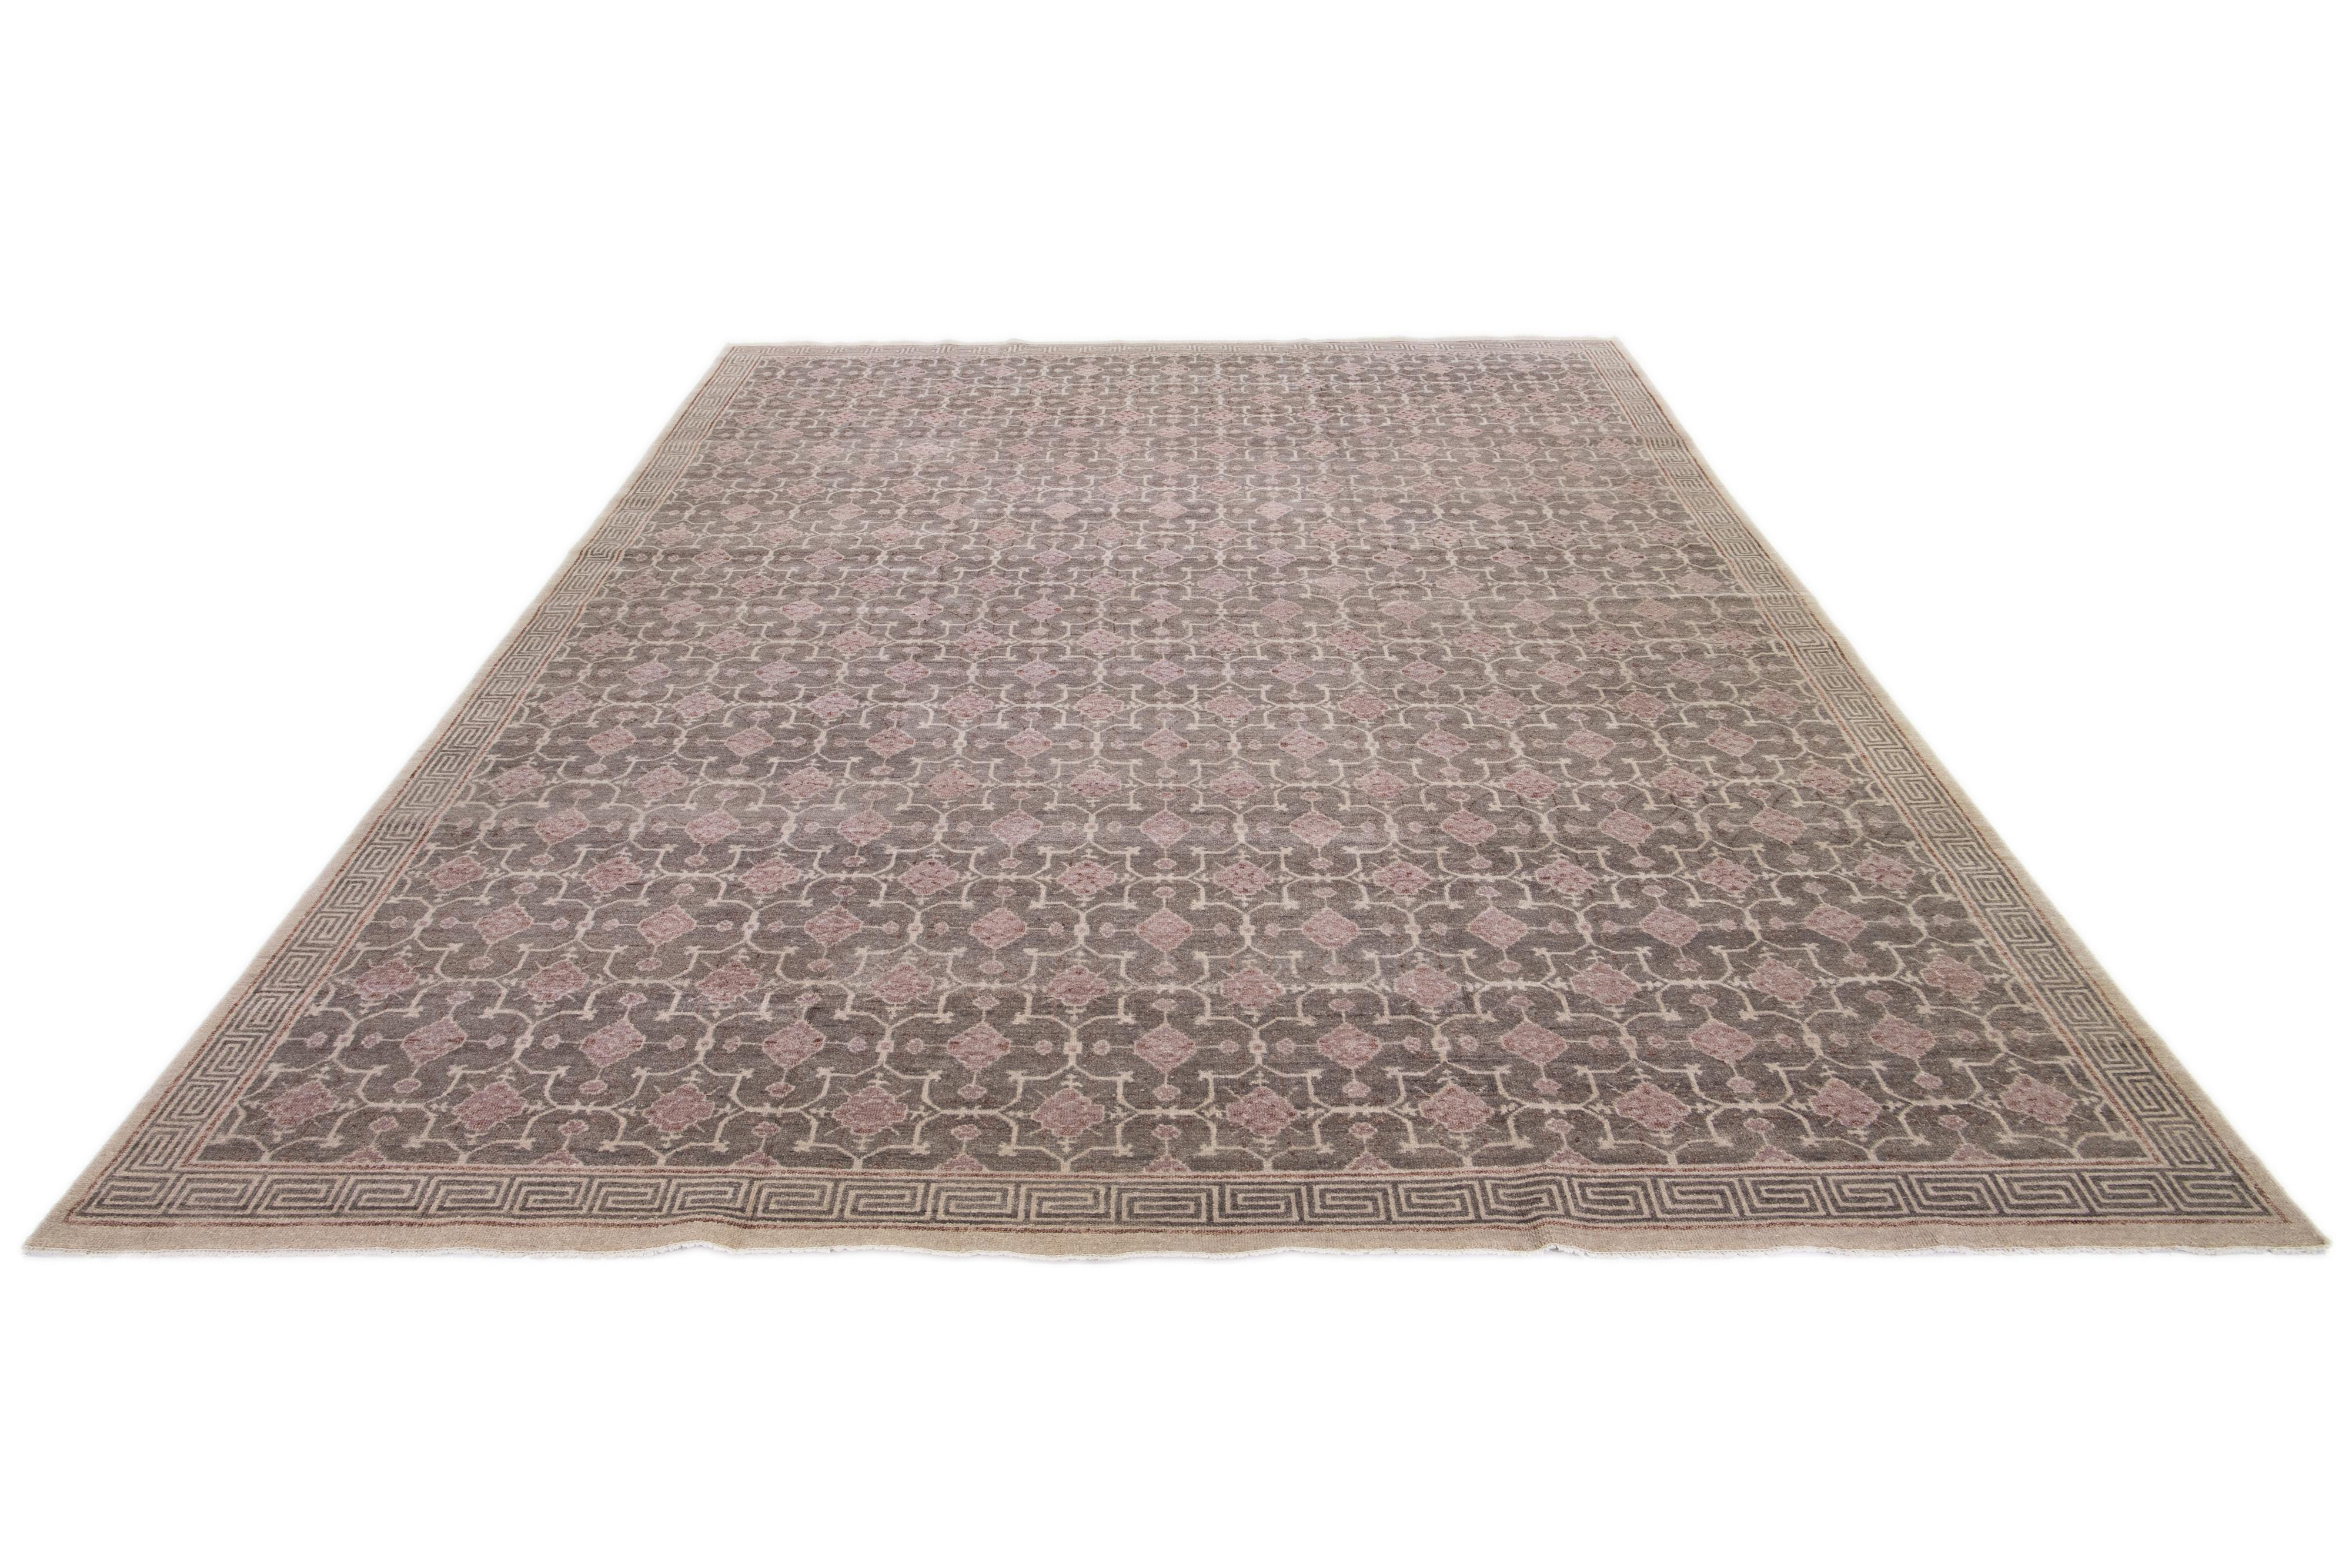 A Khotan wool rug In a gray color field with interconnected rosette designs. This hand-knotted modern piece has beige and brown accents that complement the design.

This rug measures 11'10